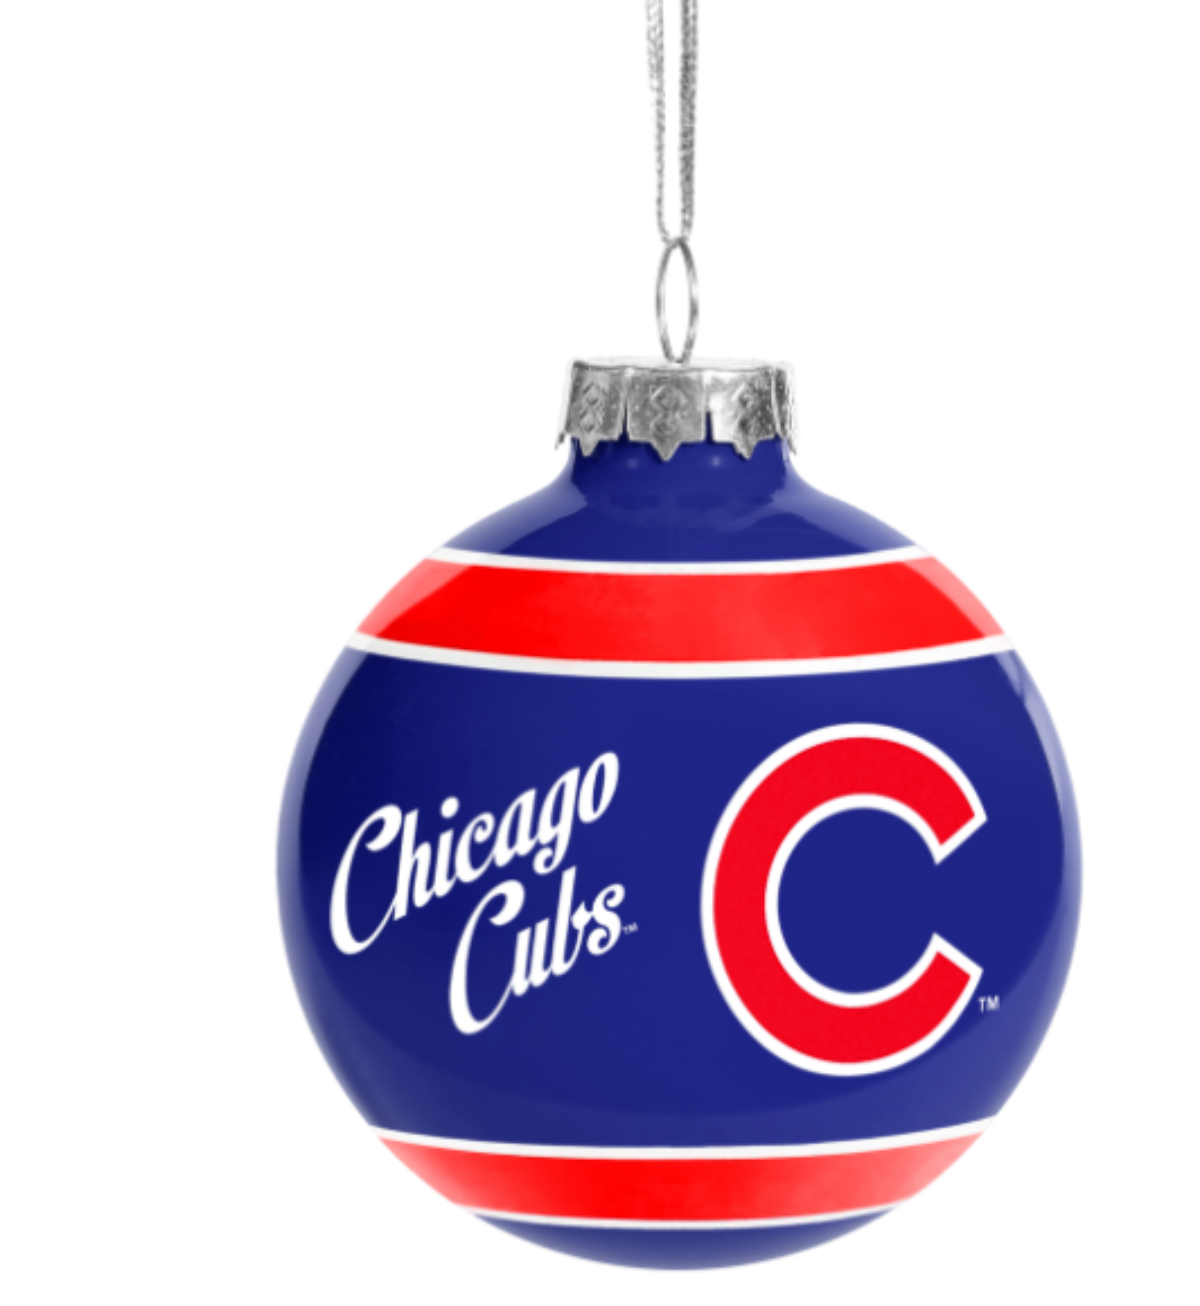 Chicago Cubs "Happy Holidays" Christmas Ornament-Blue